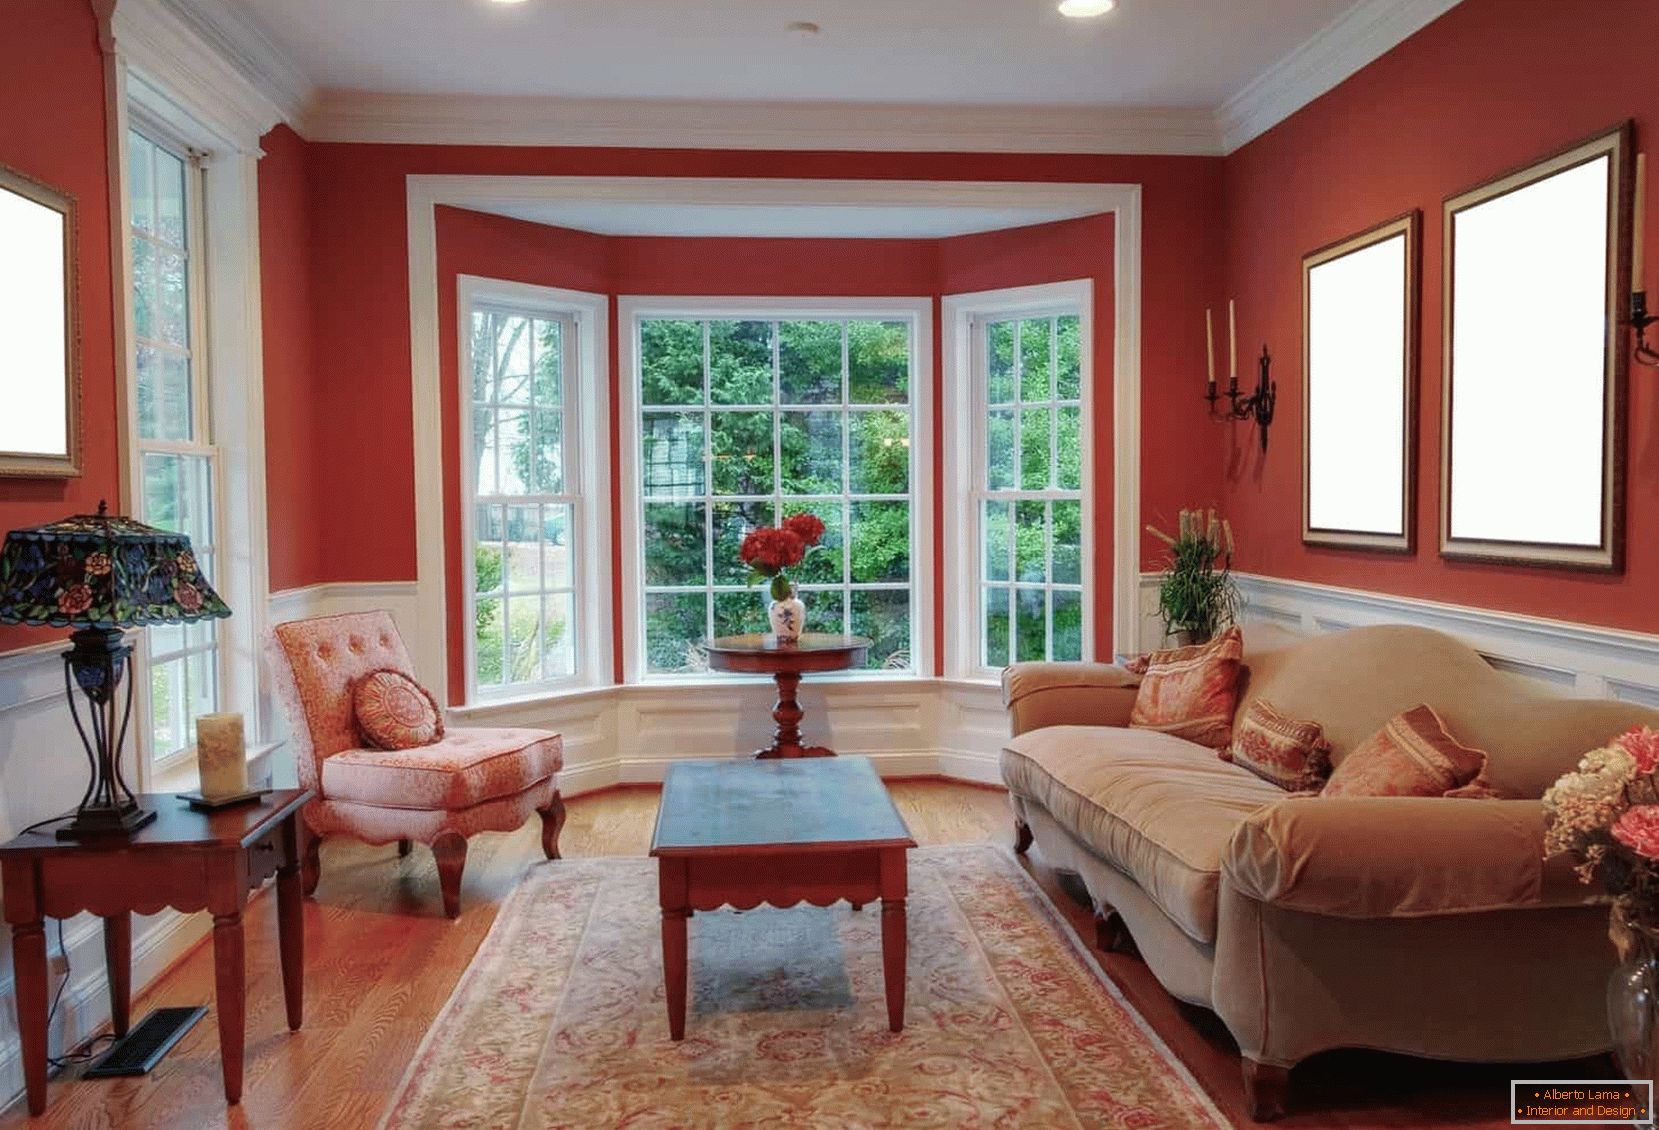 Living room with a bay window